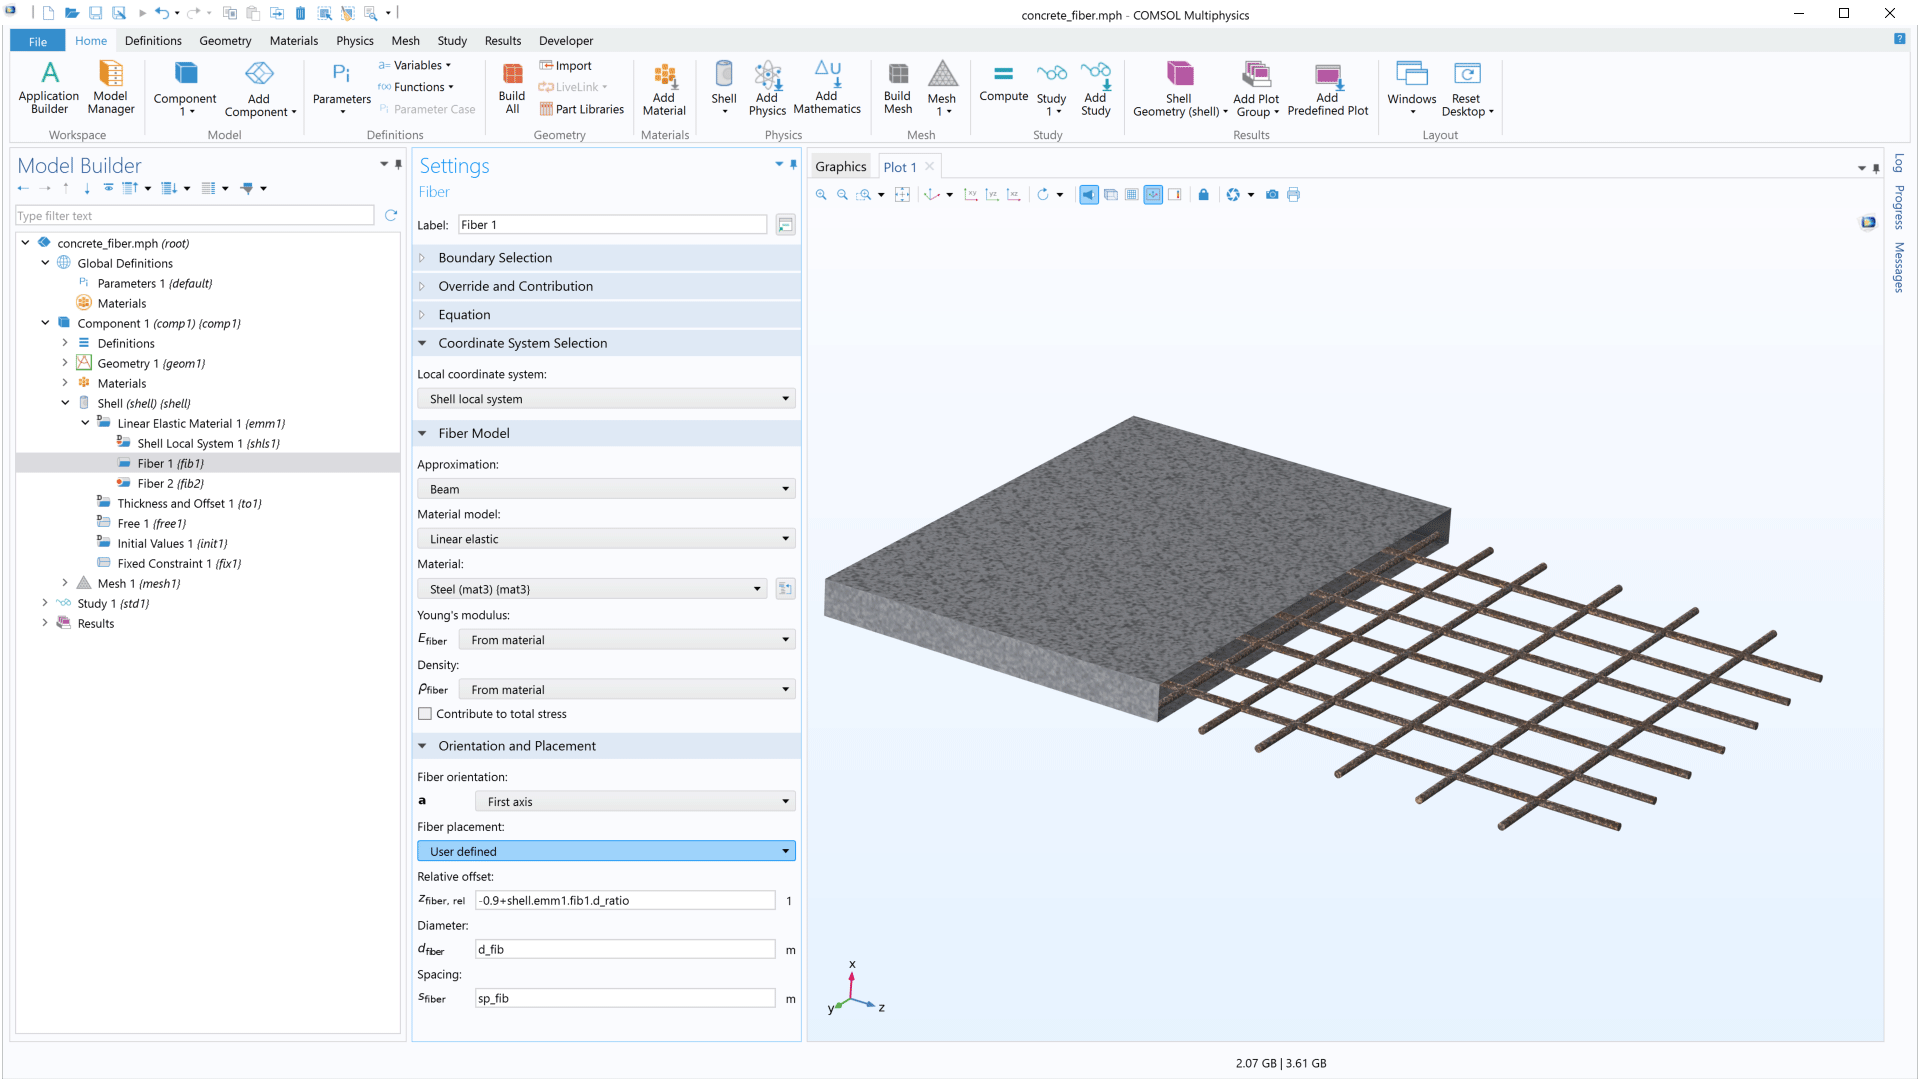 The COMSOL Multiphysics UI showing the Model Builder with the Fiber node highlighted, the corresponding Settings window, and a concrete model in the Graphics window.